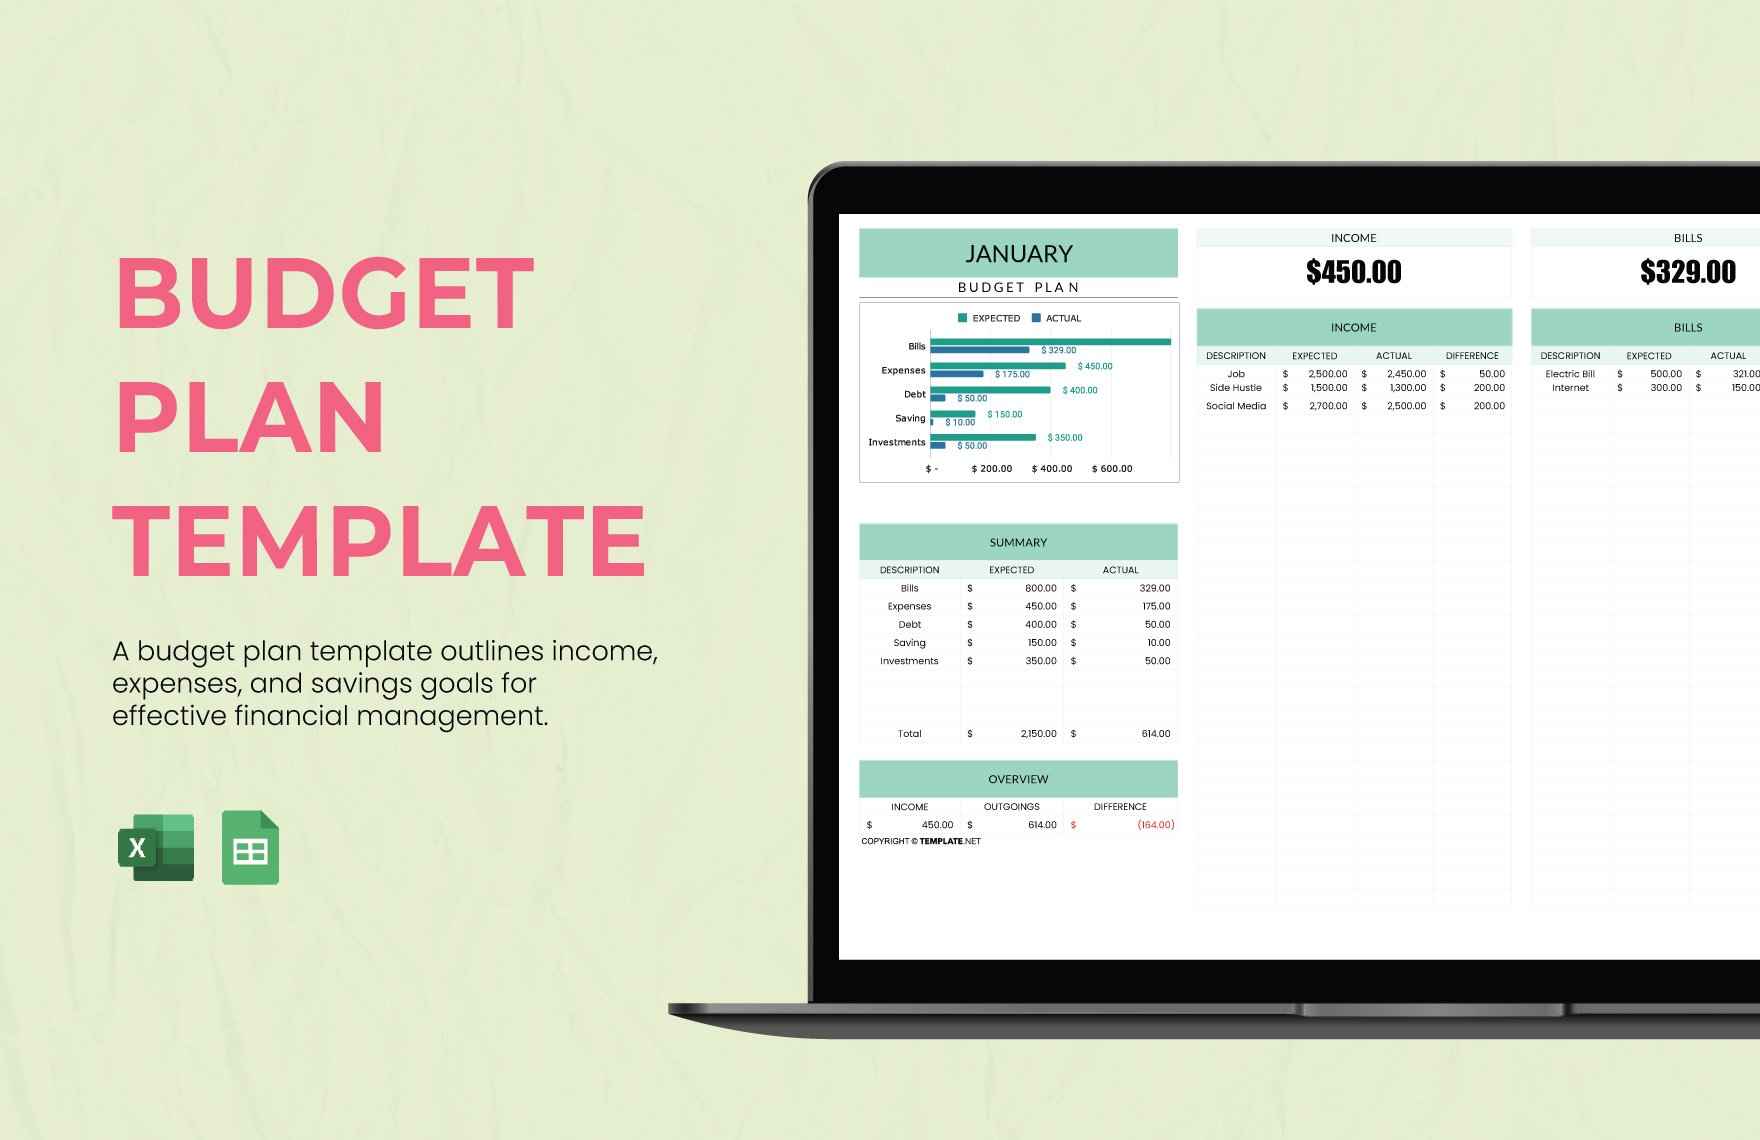 Budget Plan Template in Excel, Google Sheets